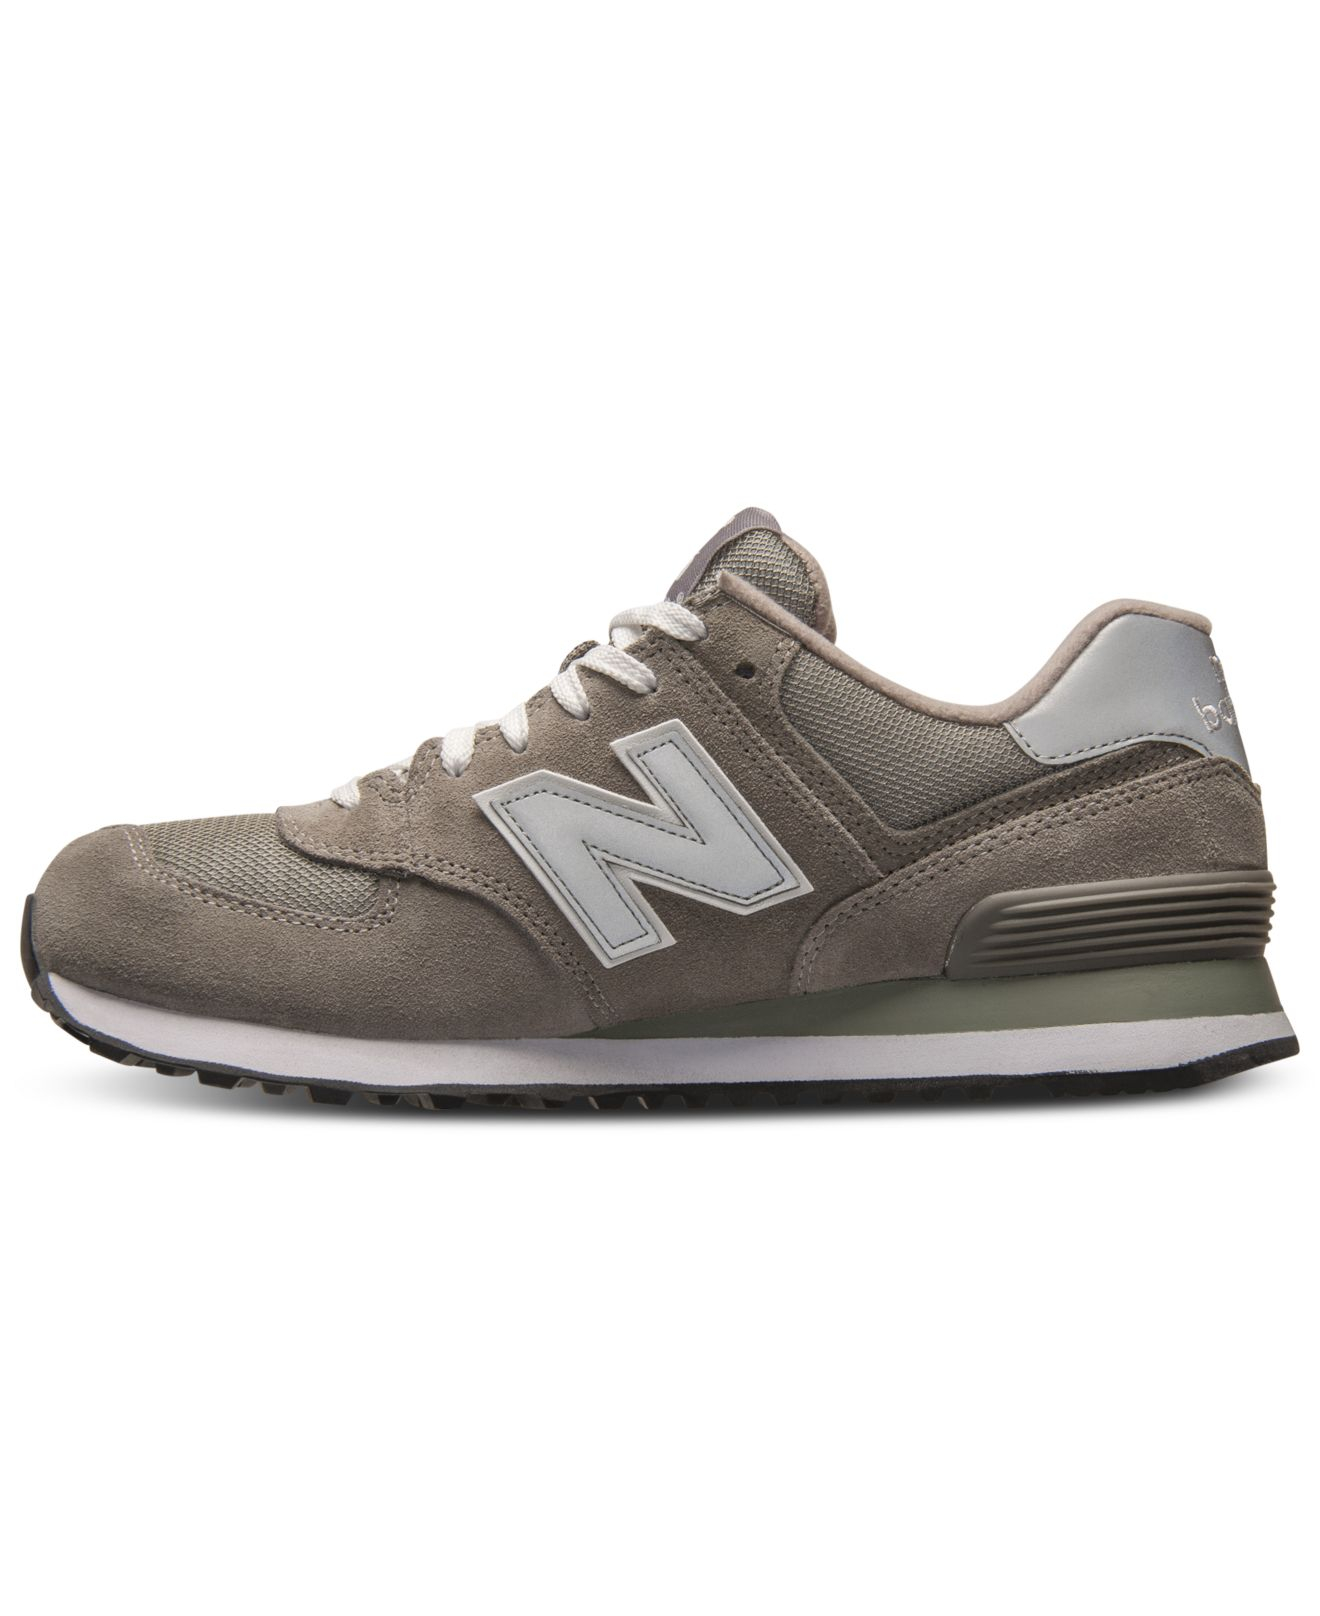 Lyst - New Balance Men's 574 Core Suede Casual Sneakers From Finish ...